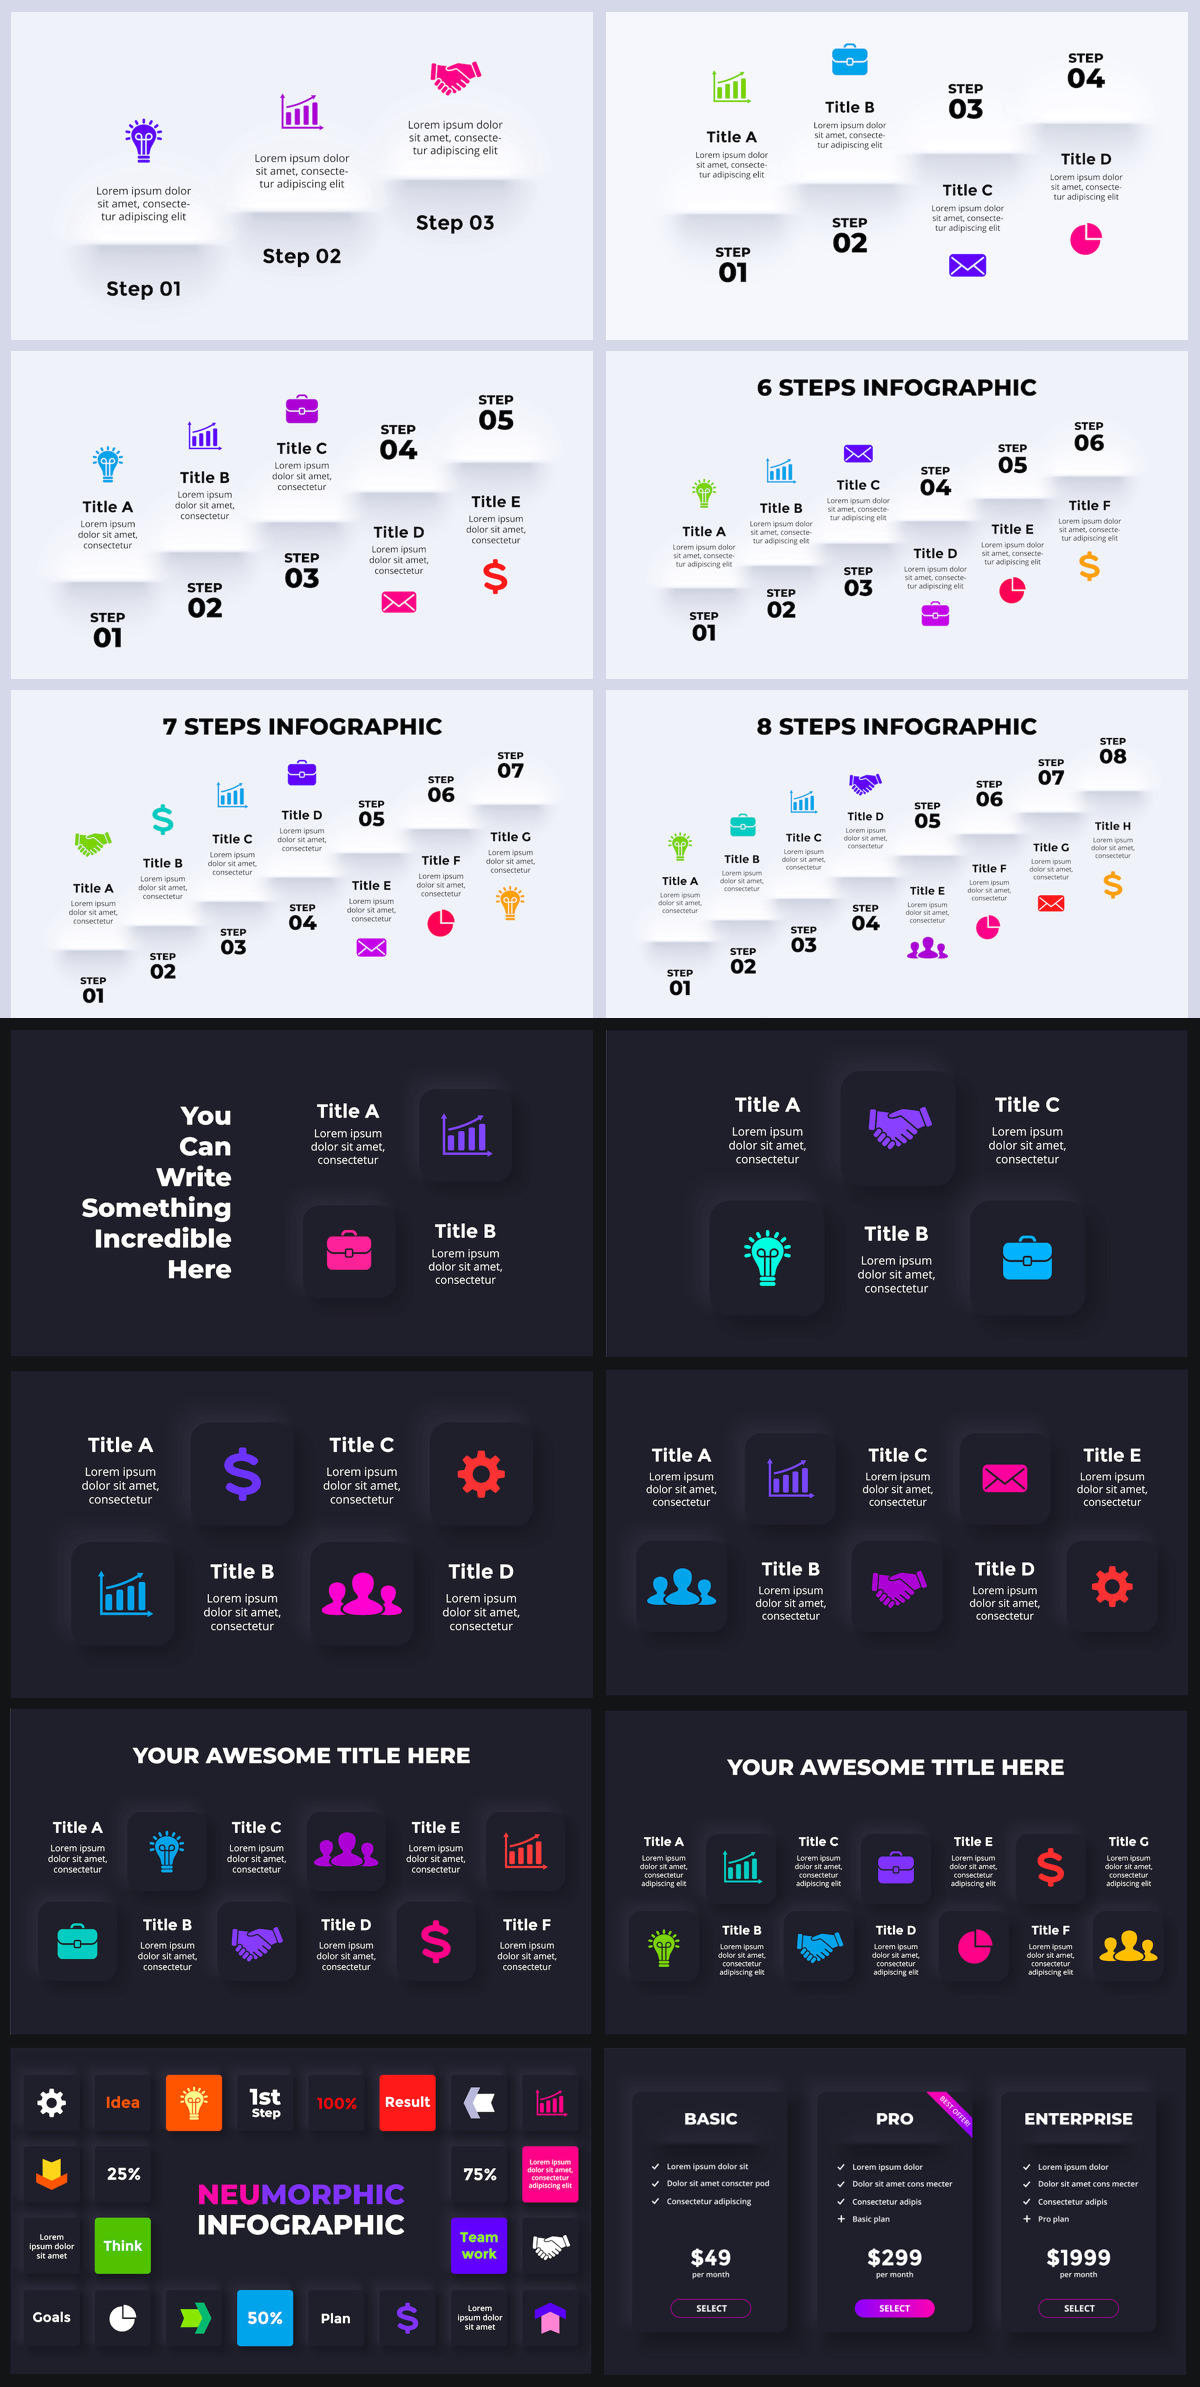 Wowly - 3500 Infographics & Presentation Templates! Updated! PowerPoint Canva Figma Sketch Ai Psd. - 321